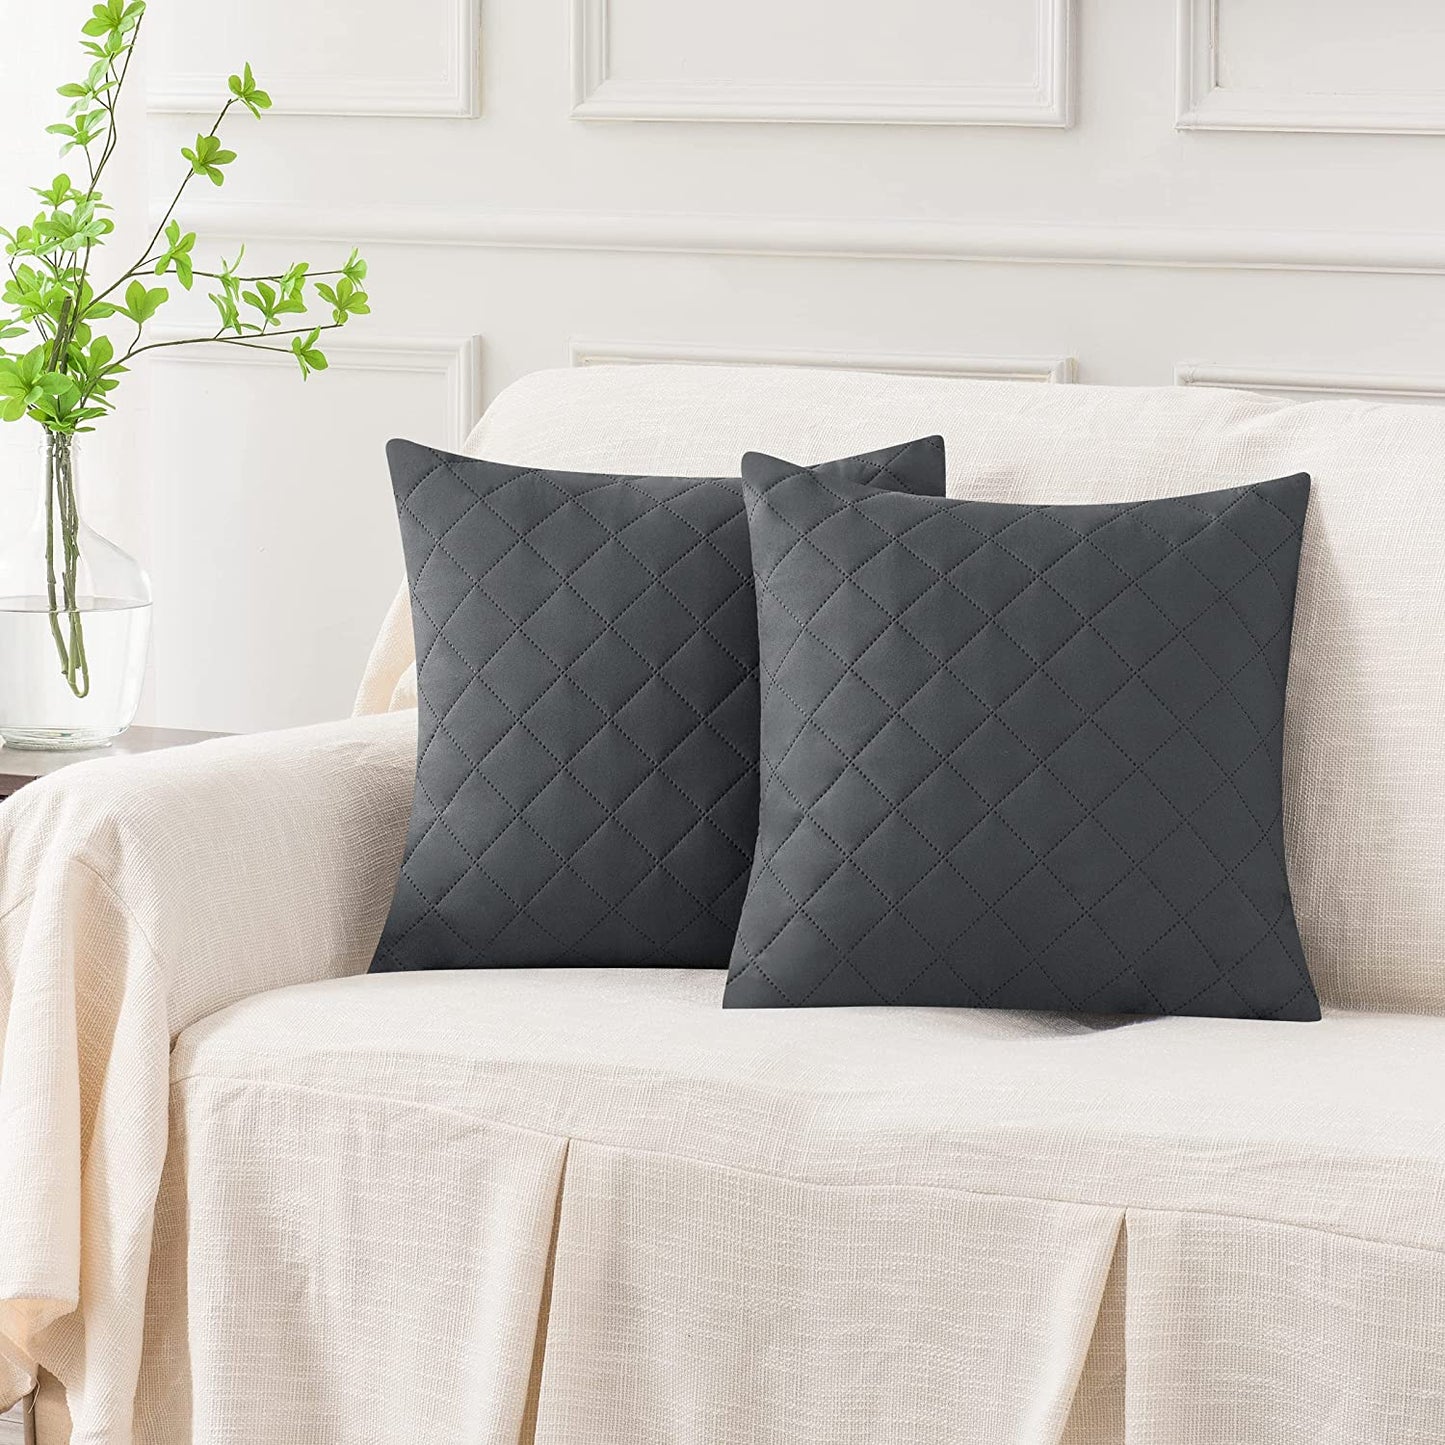 QUILTED CUSHION COVER SQUARE PATTERN 16 X 16 INCHES - GREY